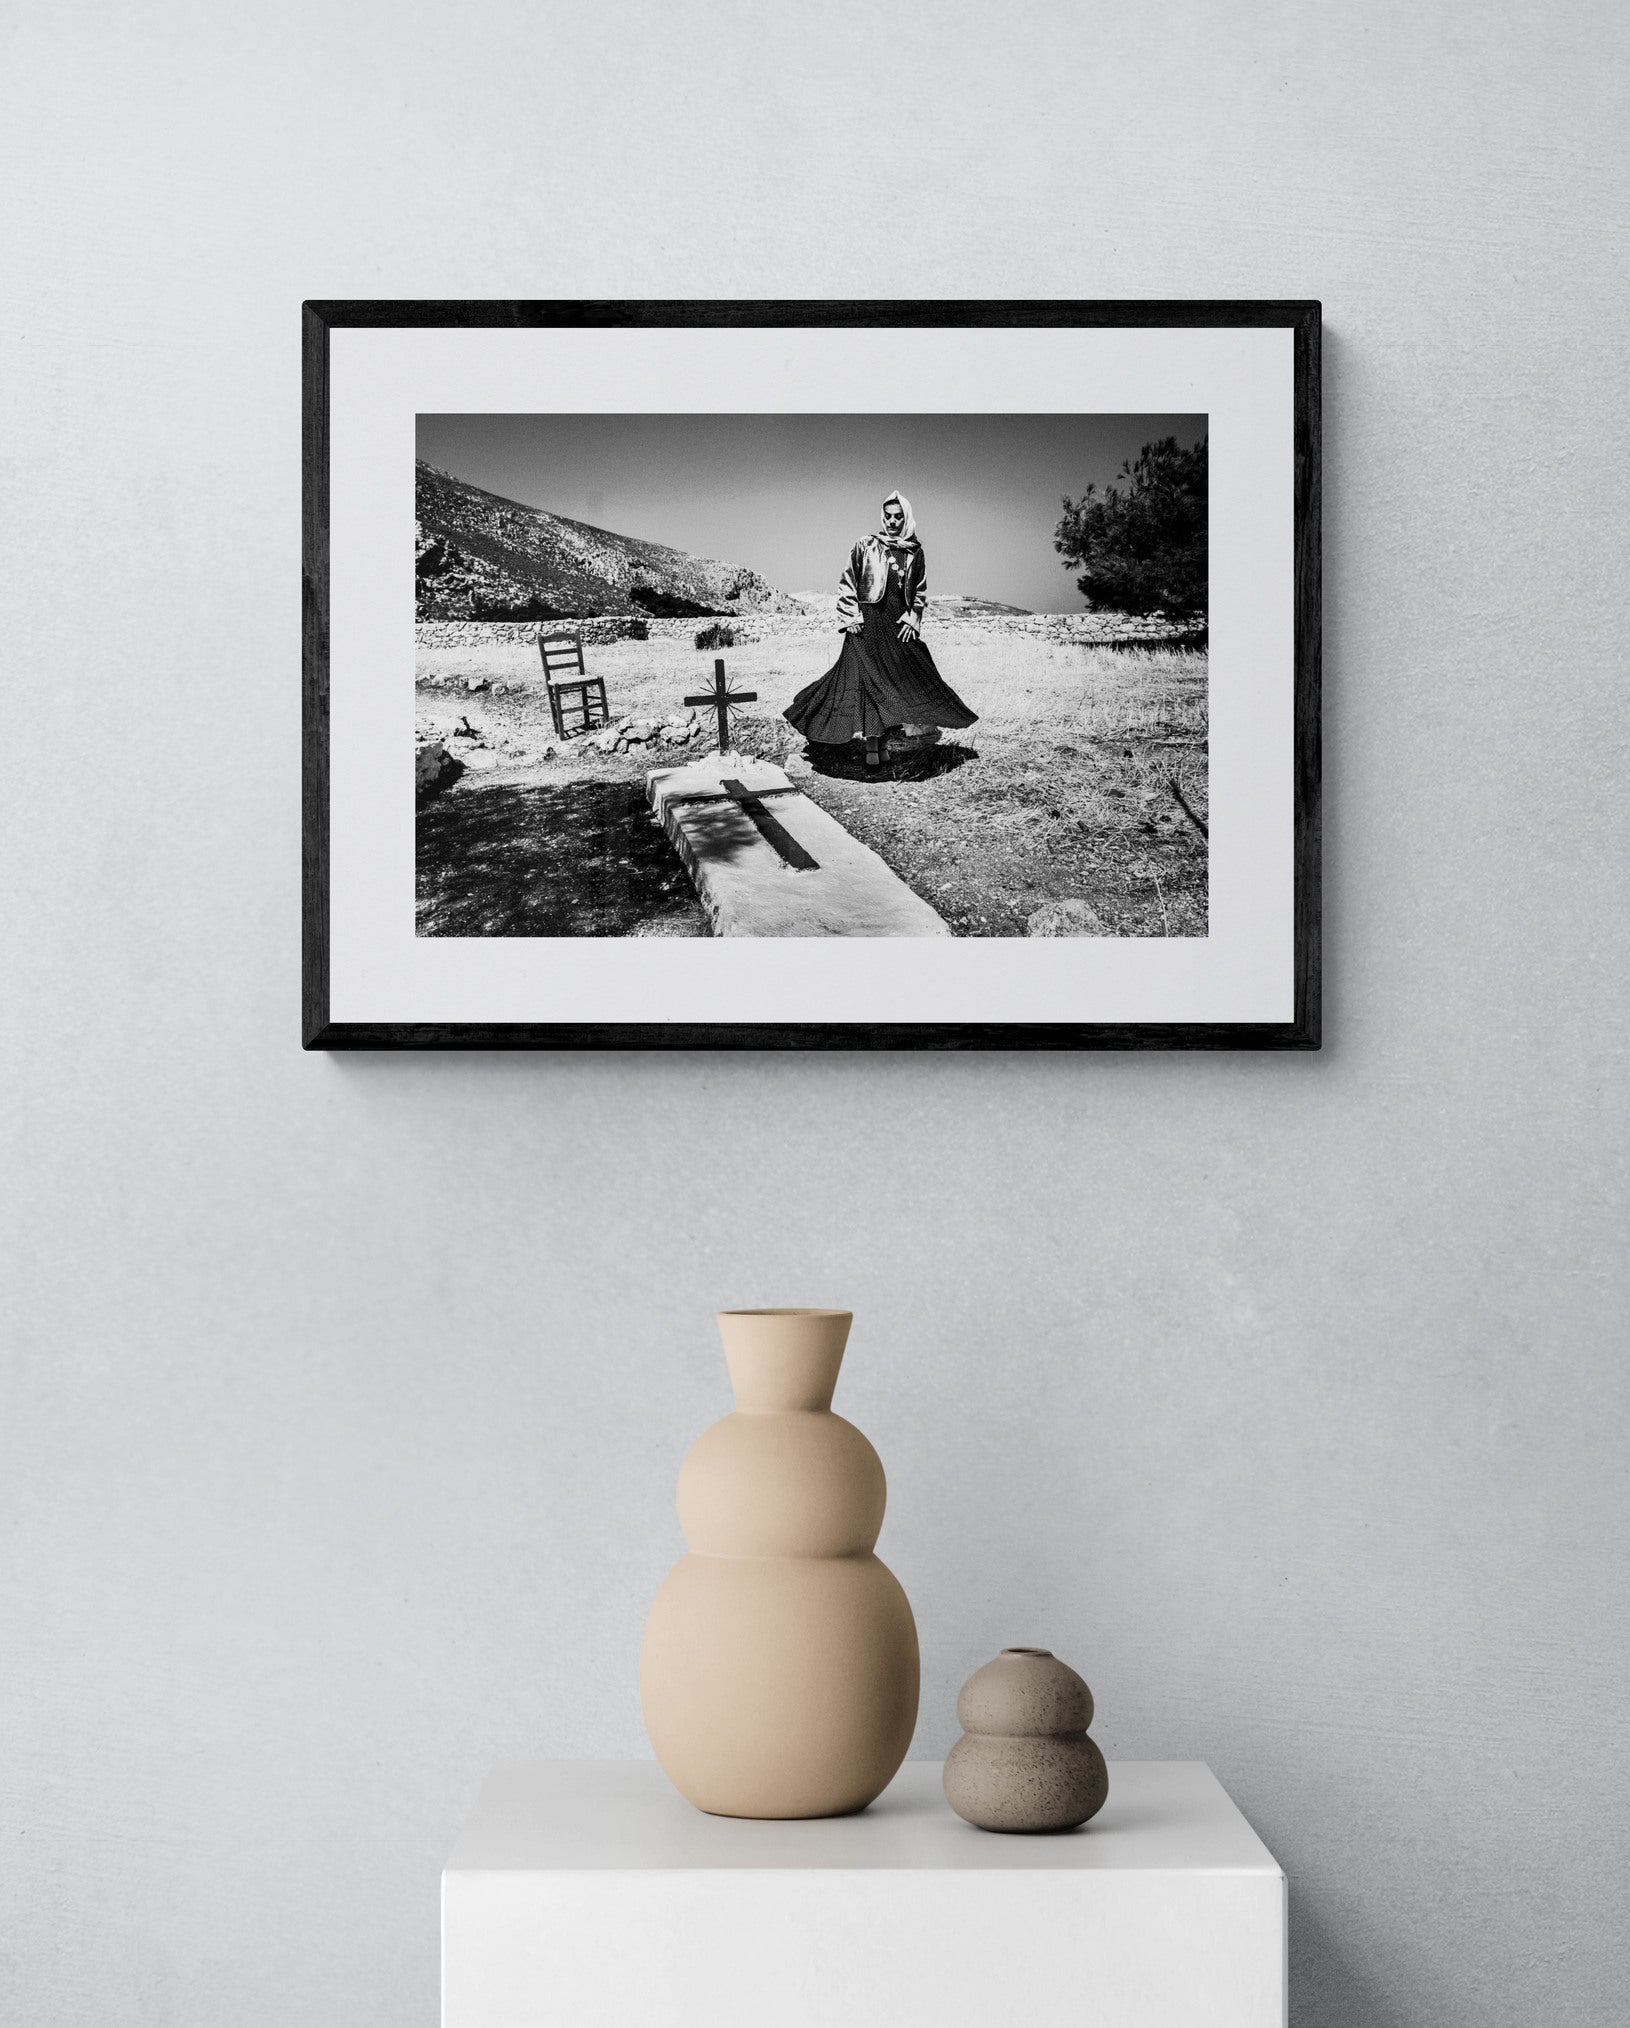 Black and White Photography Wall Art Greece | Monastery Kalymnos Dodecanese by George Tatakis - single framed photo